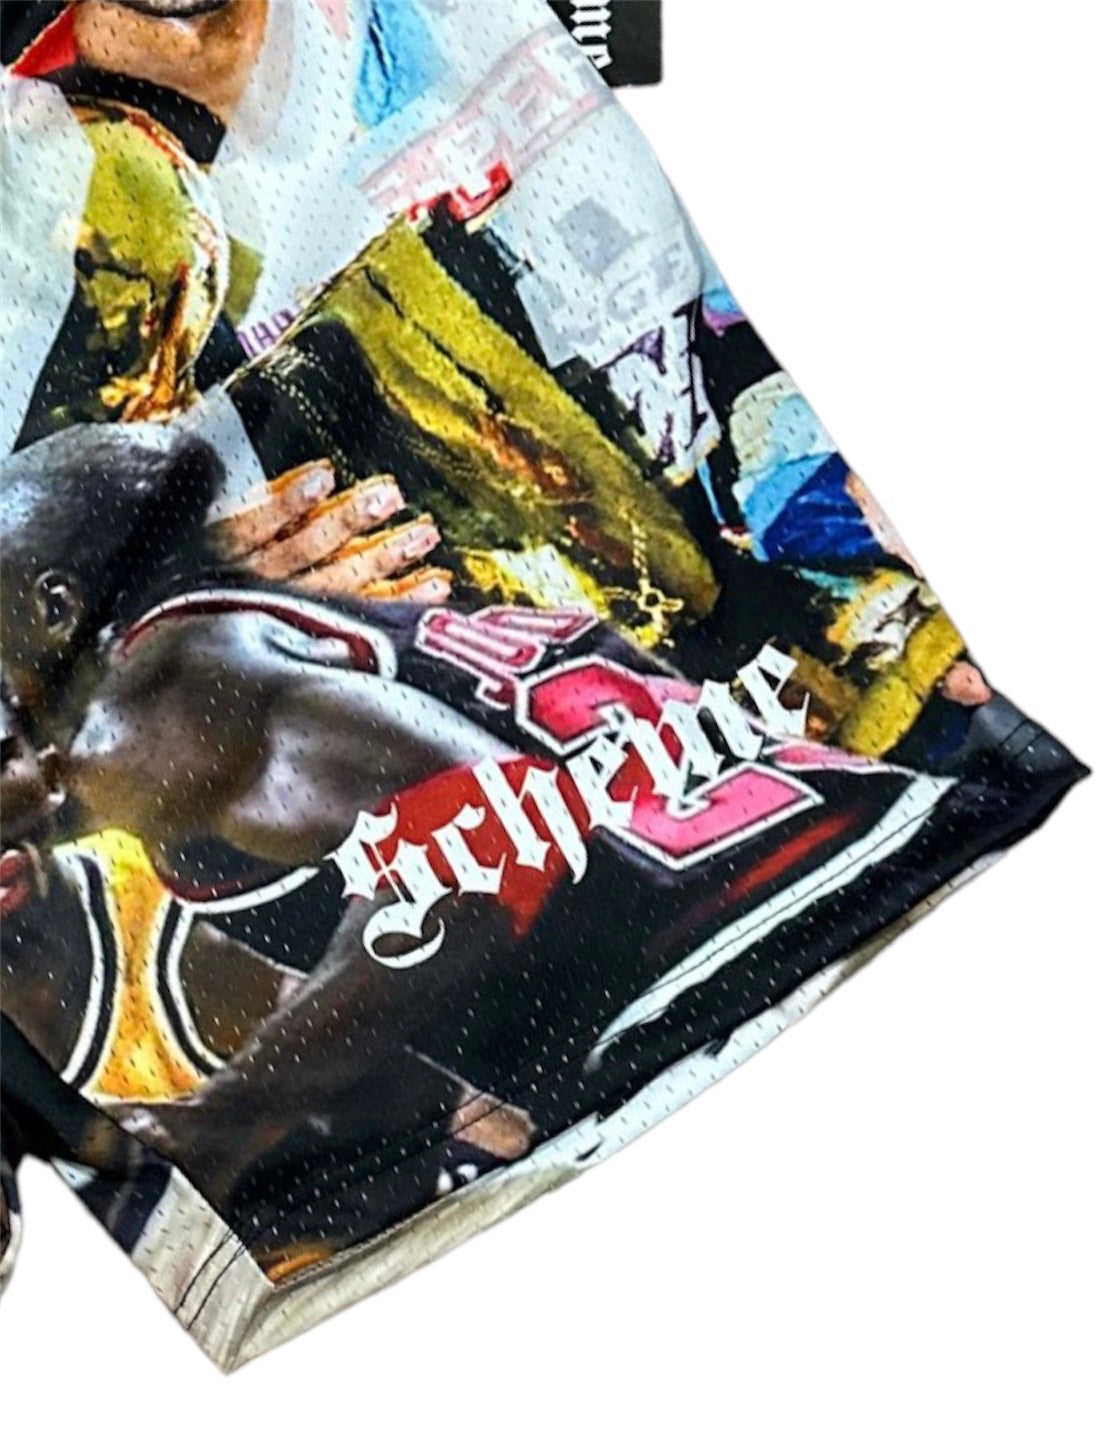 Men's graphic mesh shorts with a picture of kobe bryant michael jordan